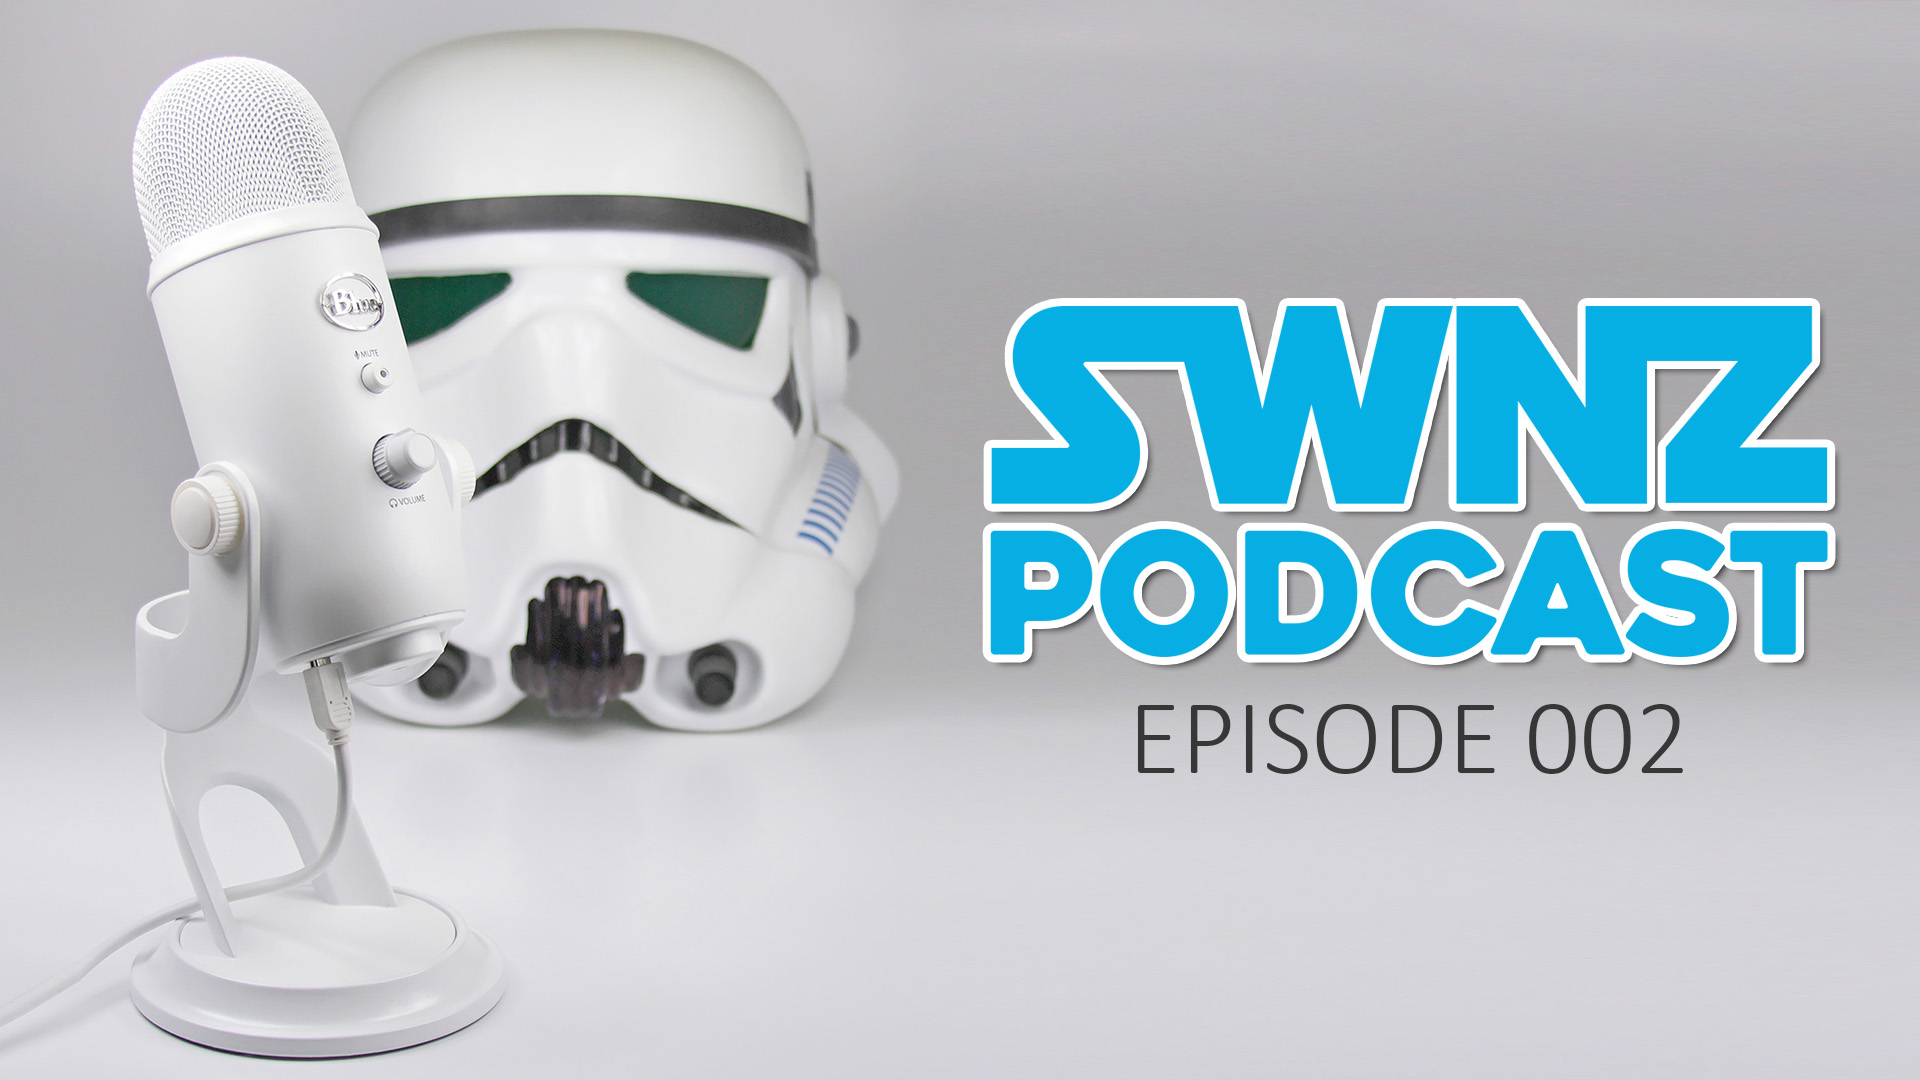 SWNZpodcast_ep002.jpg